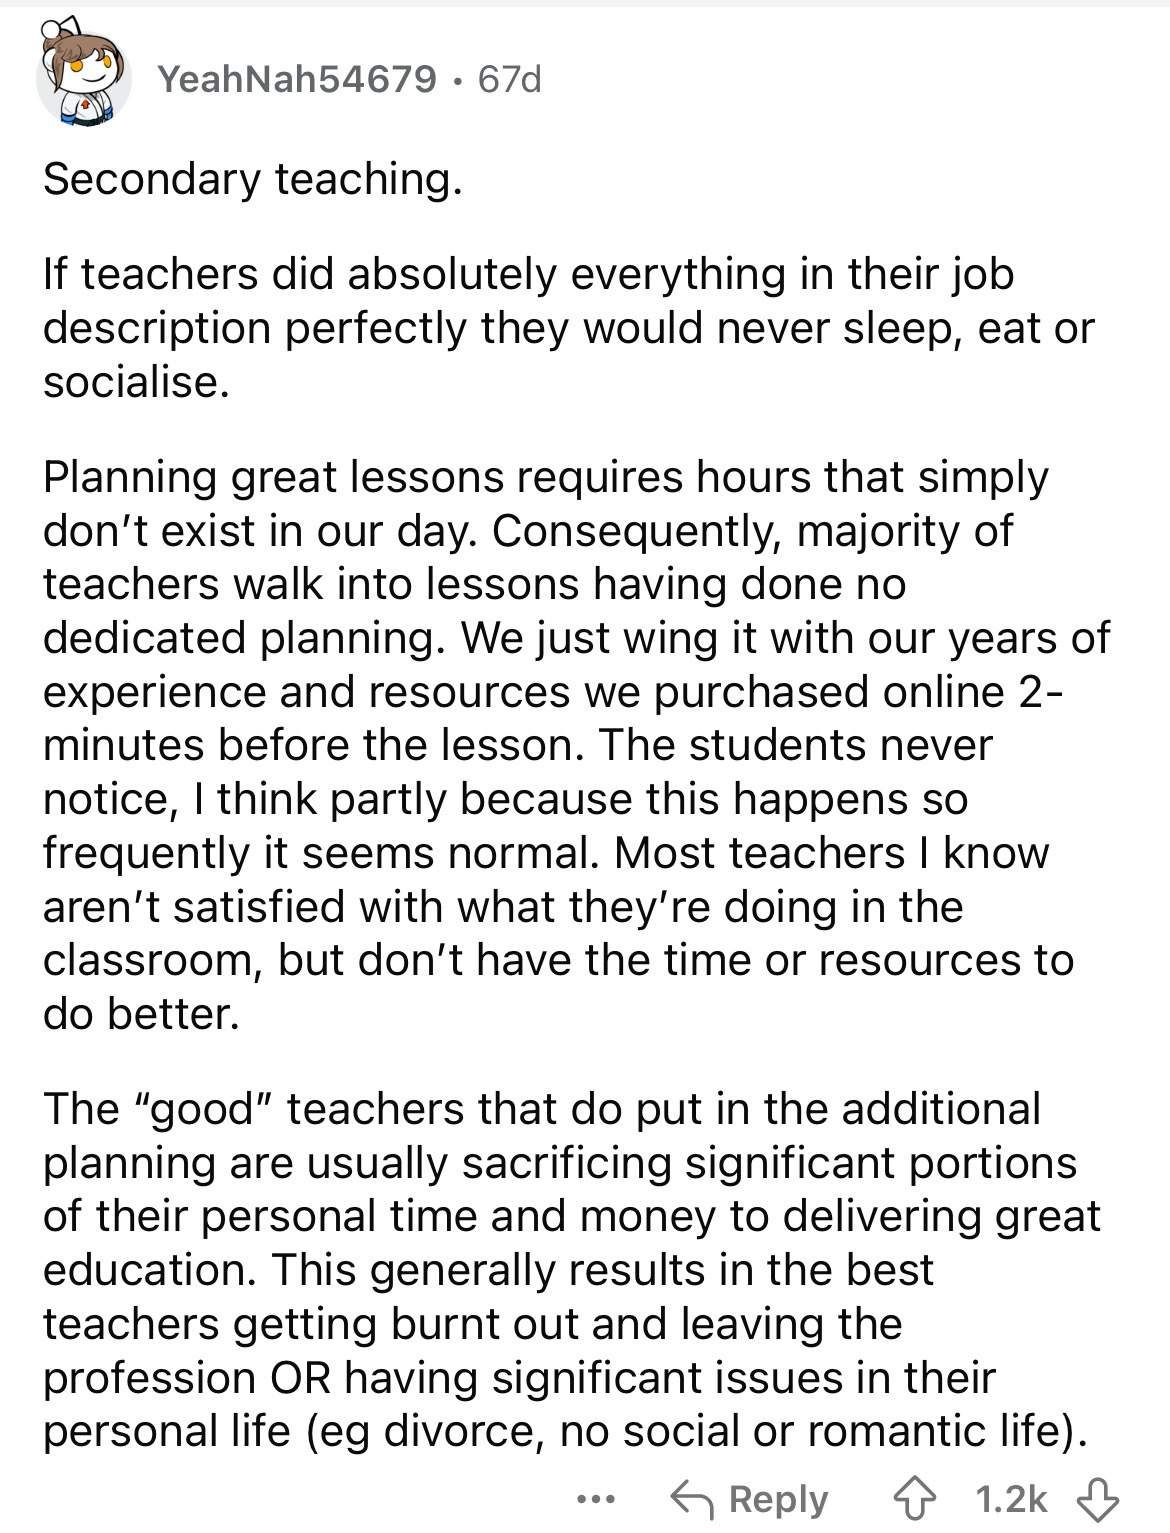 document - YeahNah54679.67d Secondary teaching. If teachers did absolutely everything in their job description perfectly they would never sleep, eat or socialise. Planning great lessons requires hours that simply don't exist in our day. Consequently, majo